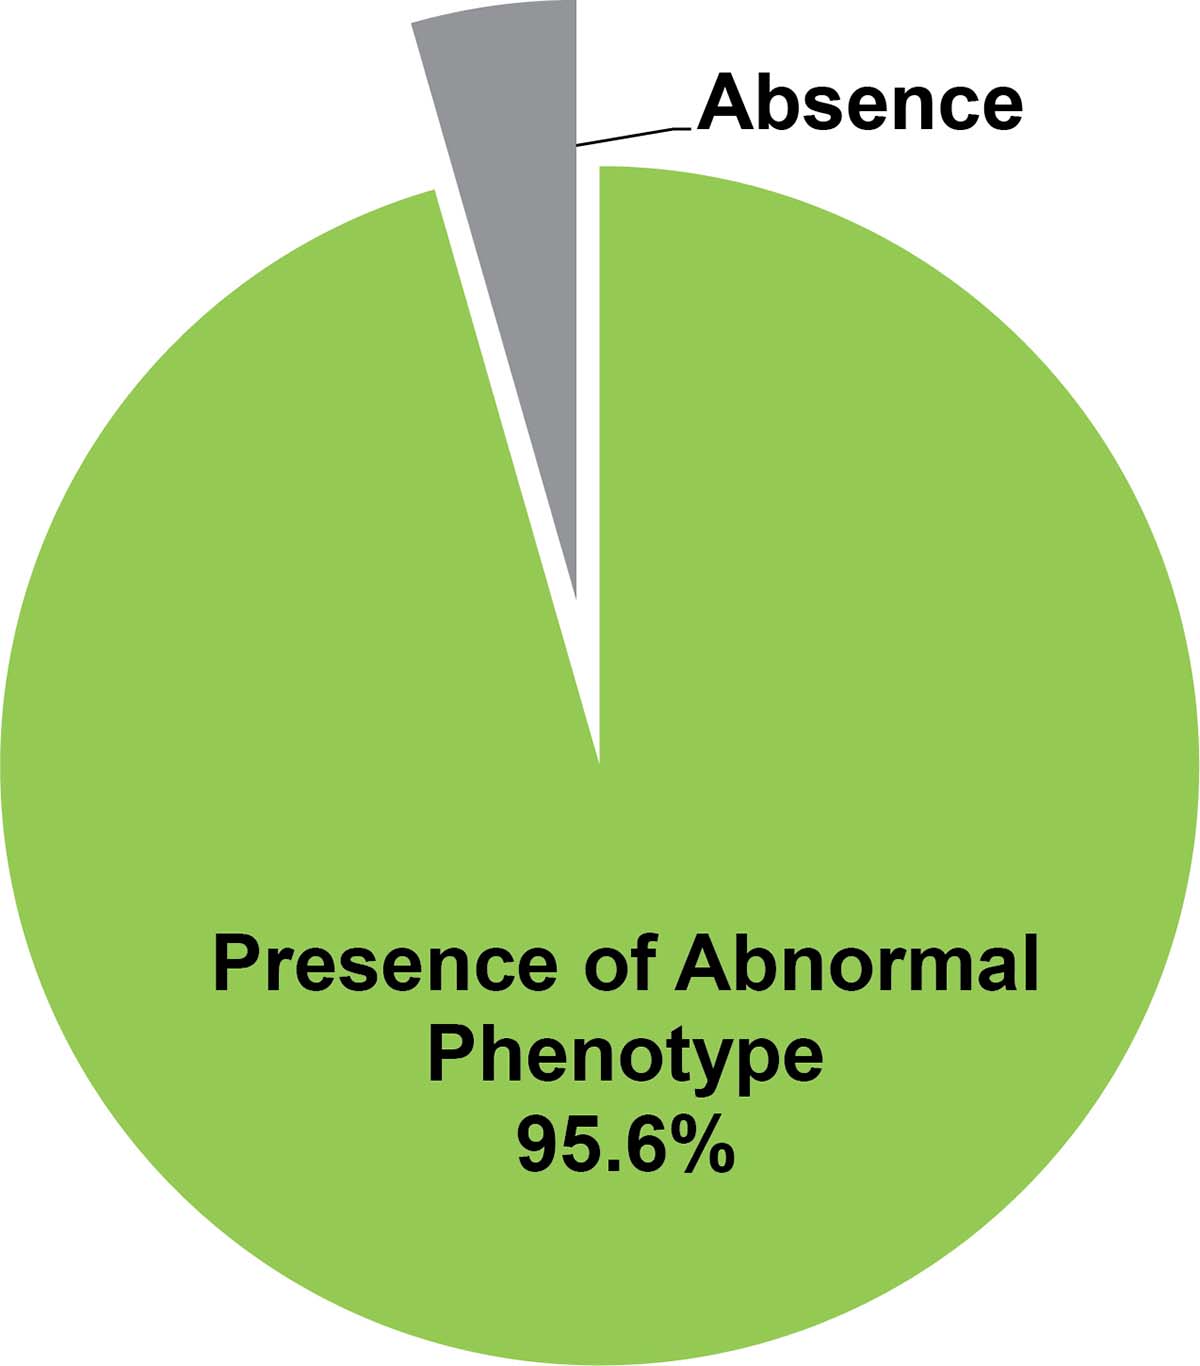 ClearLLab LS phenotypic agreement to specimens with abnormal phenotype identified by LDT, this represents 95.6% of the abnormal specimens.